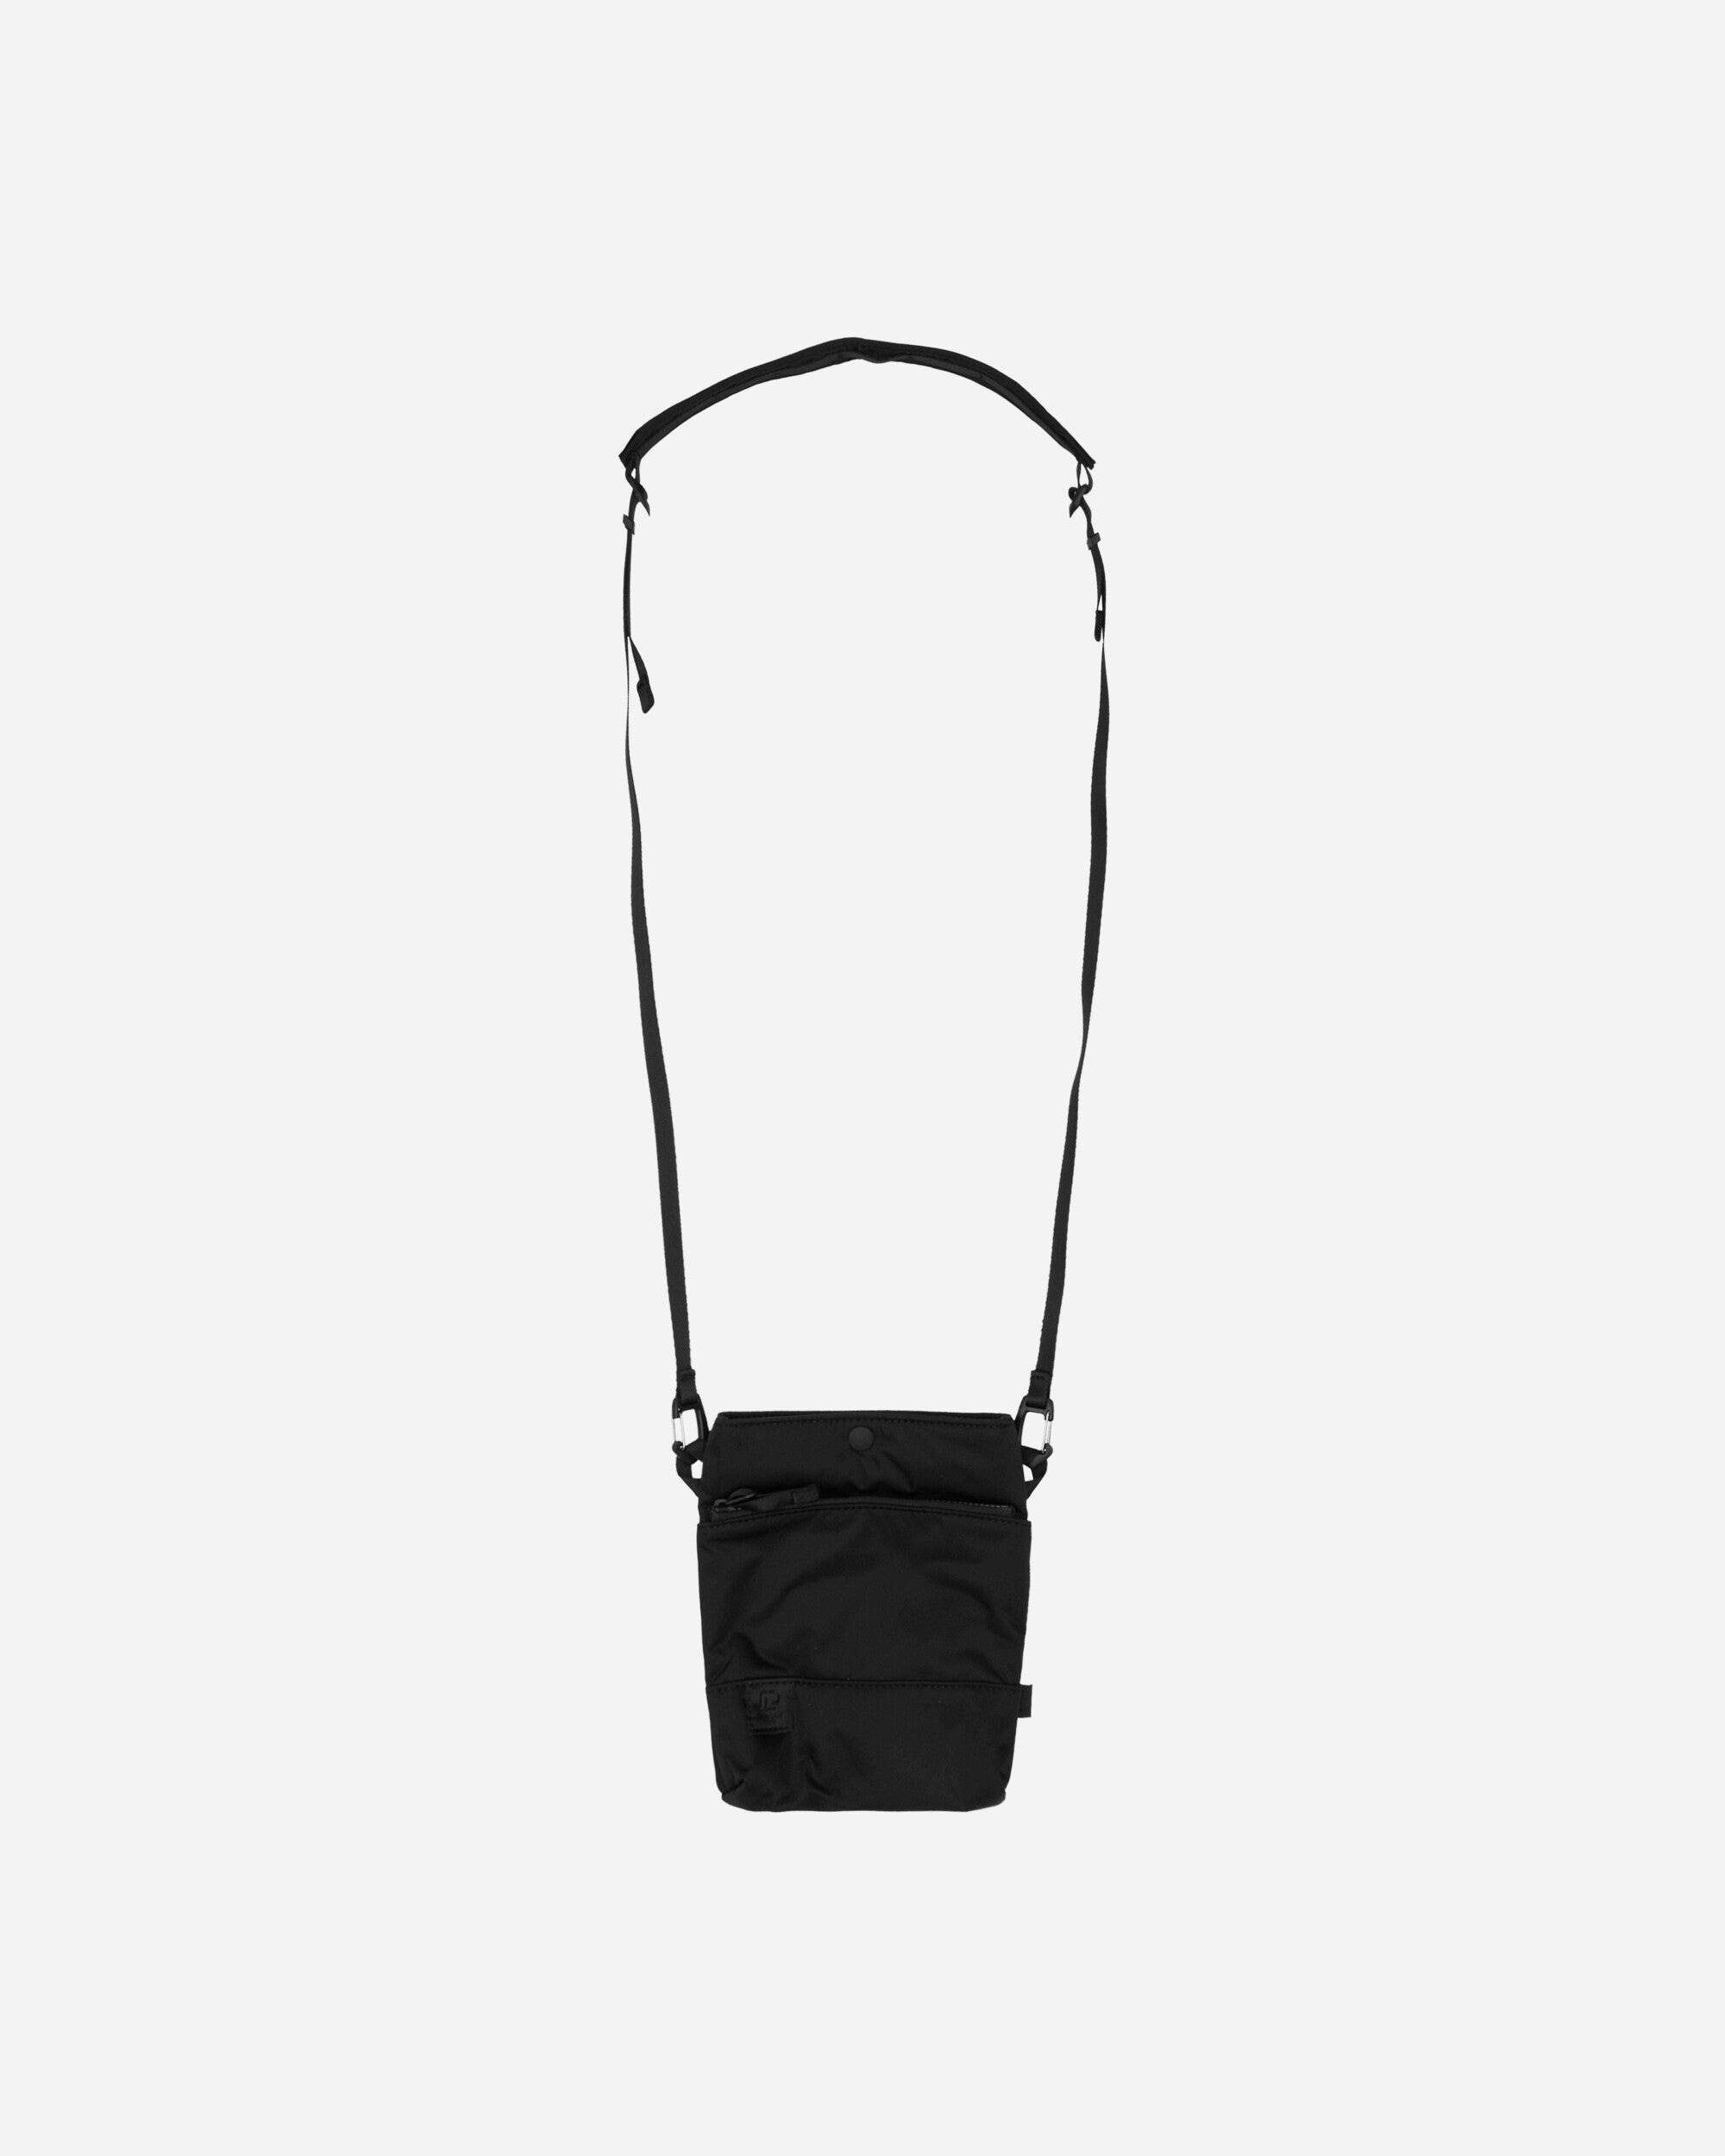 Ramidus Sacoche (S) Black Bags and Backpacks Pouches B017032 001